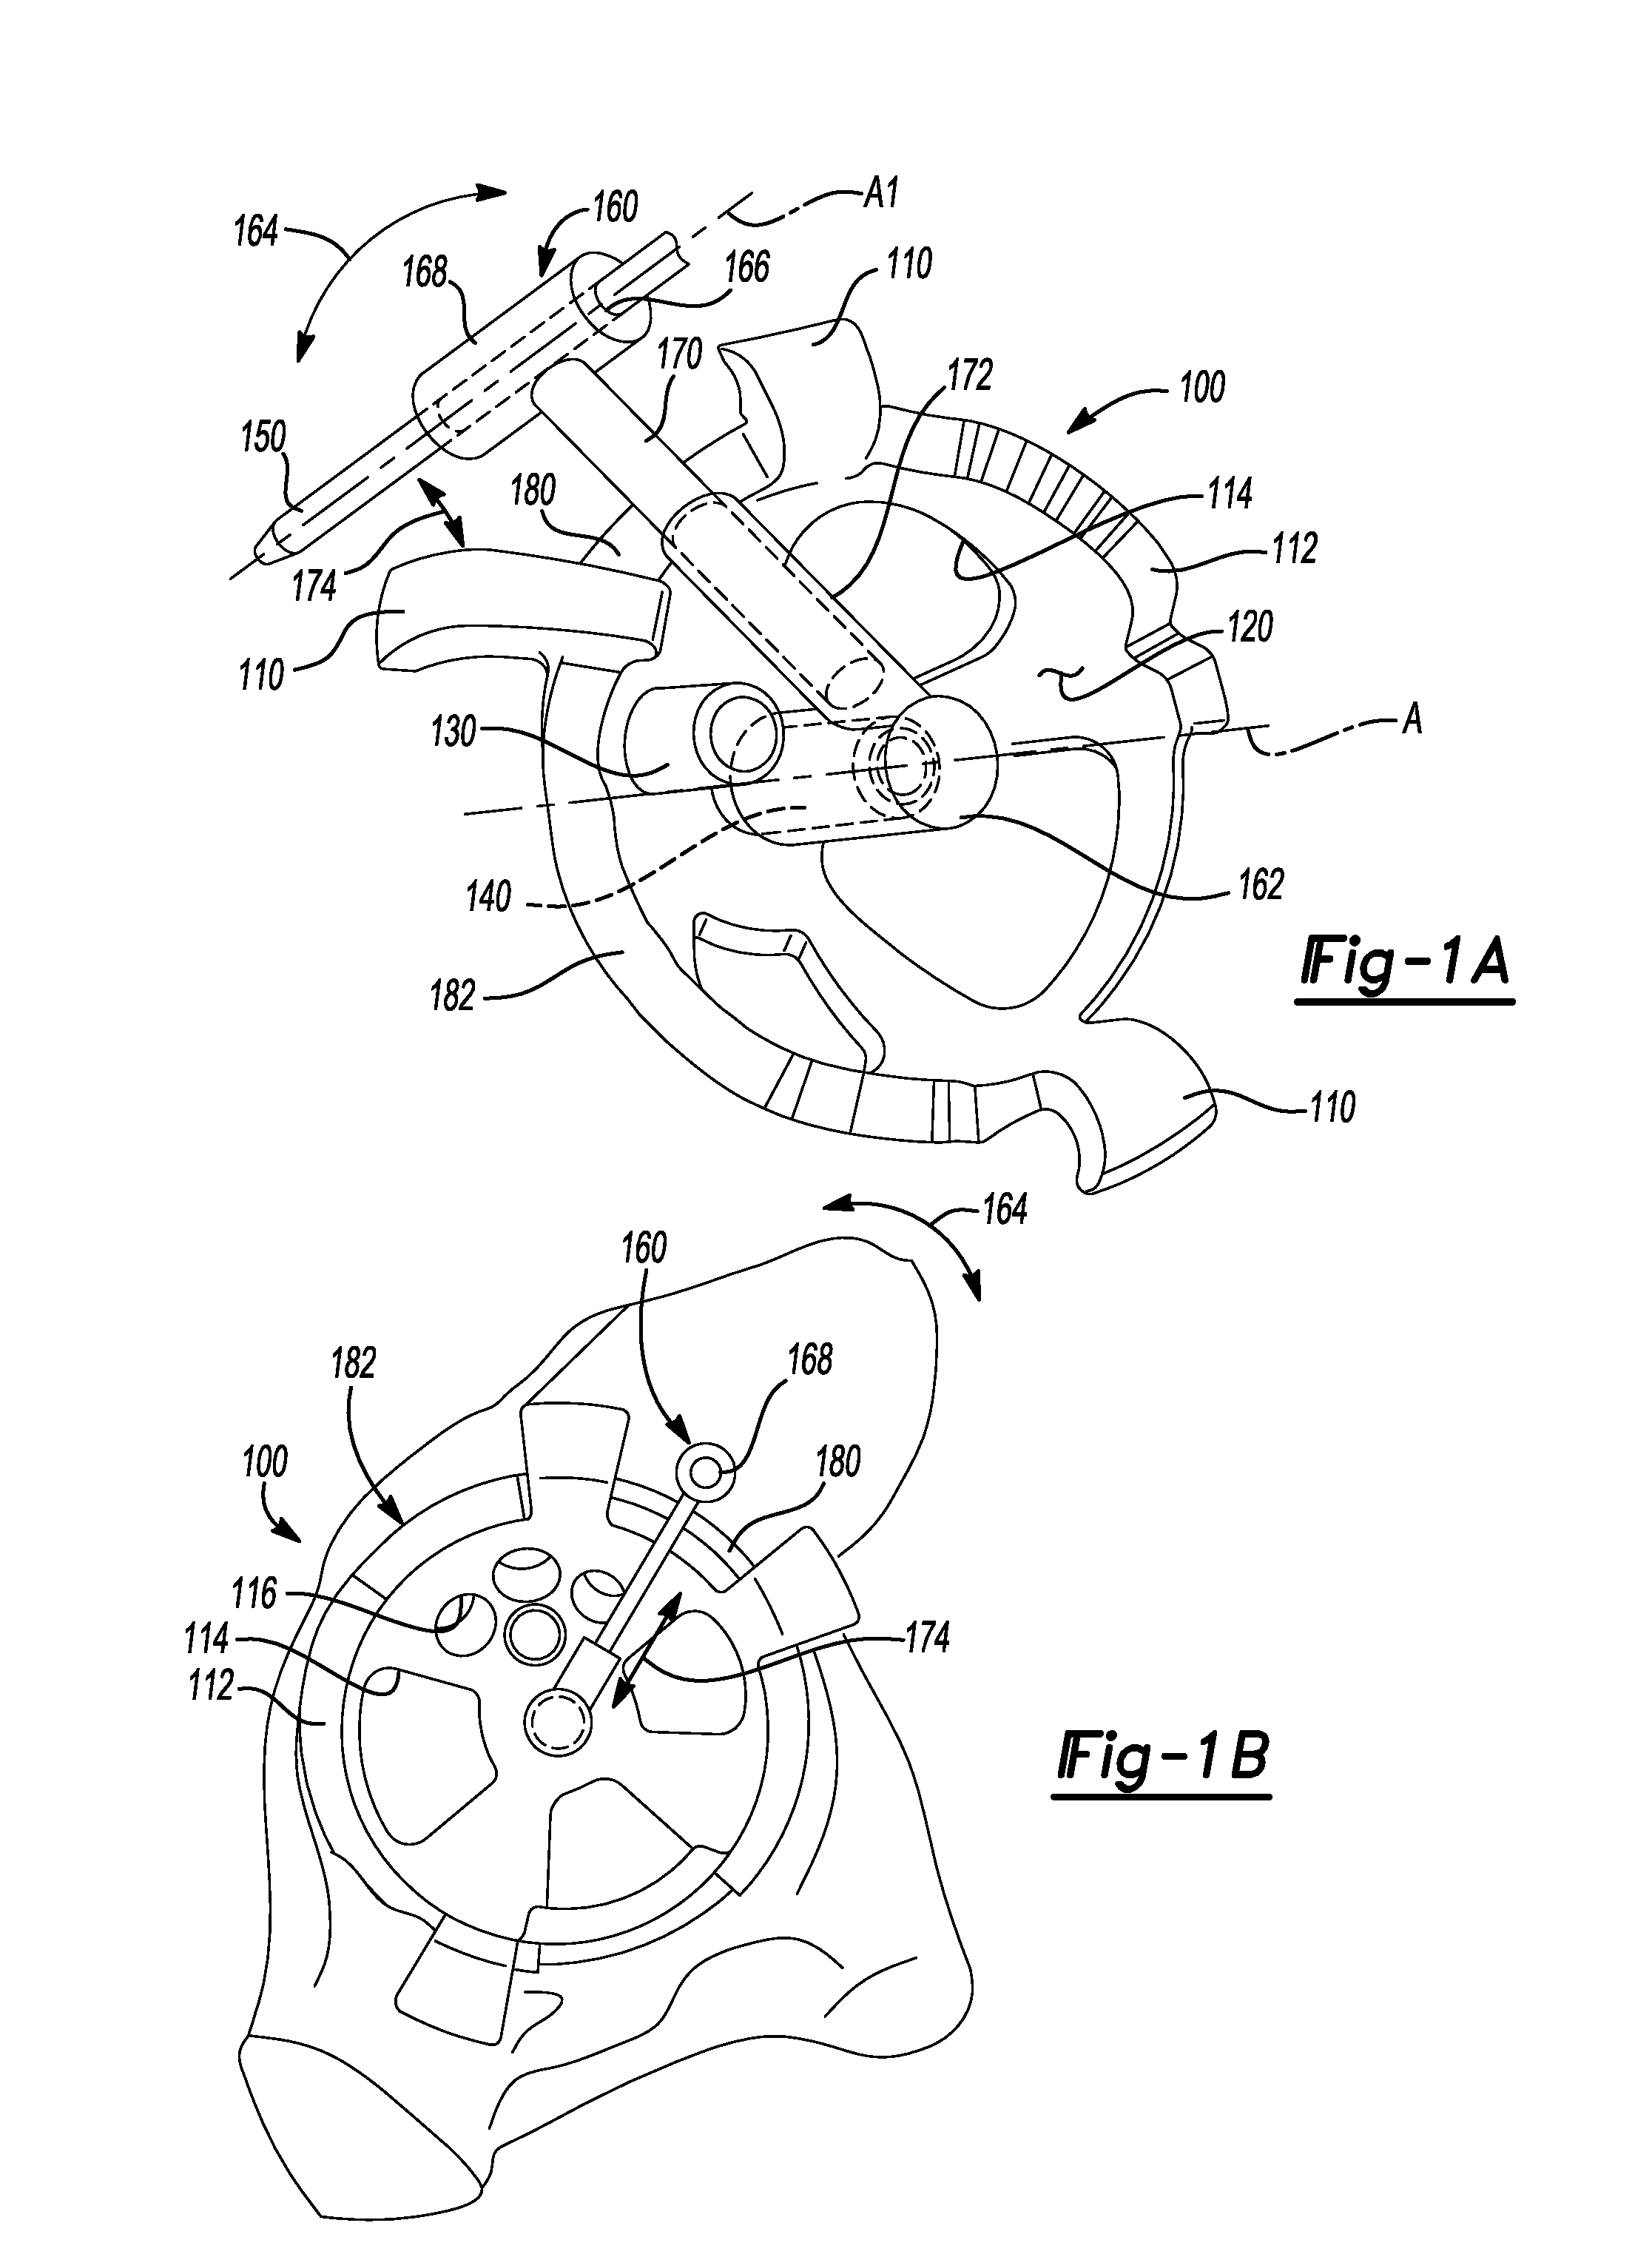 Universal Acetabular Guide And Associated Hardware